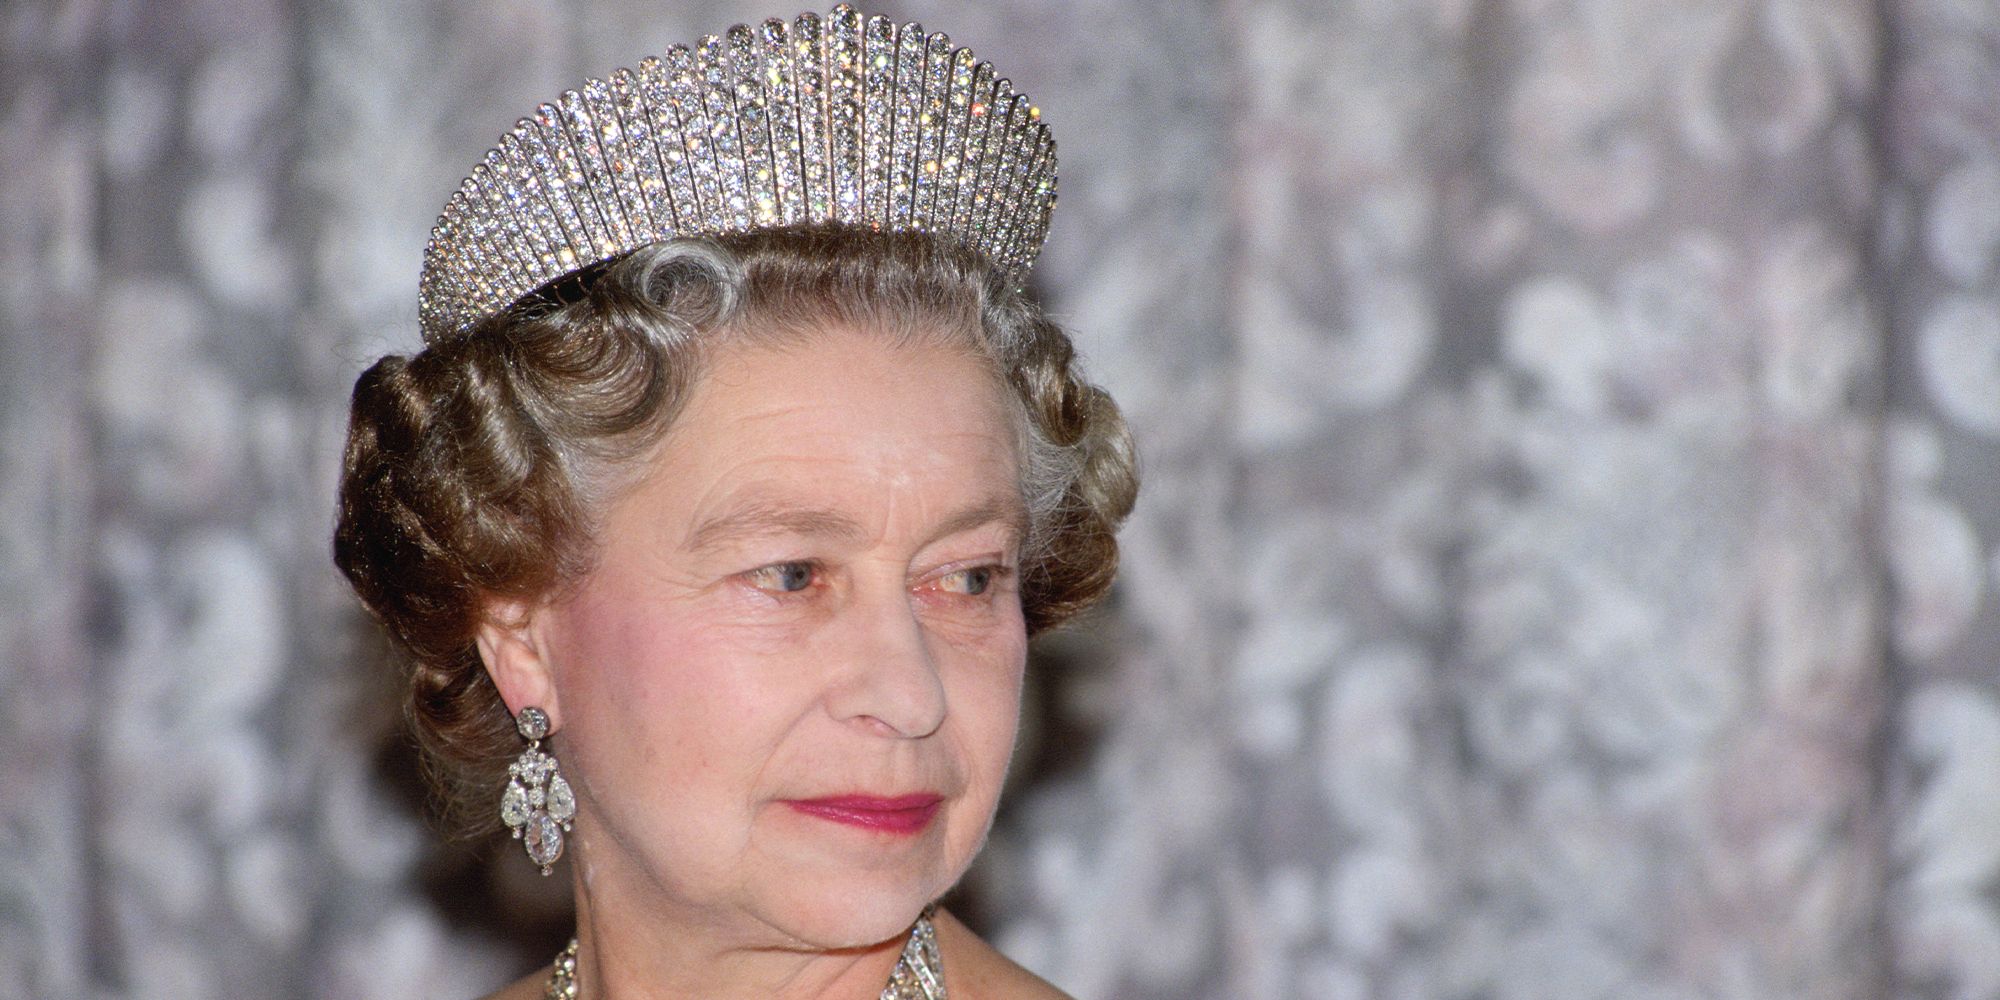 The Queen's most meaningful jewellery